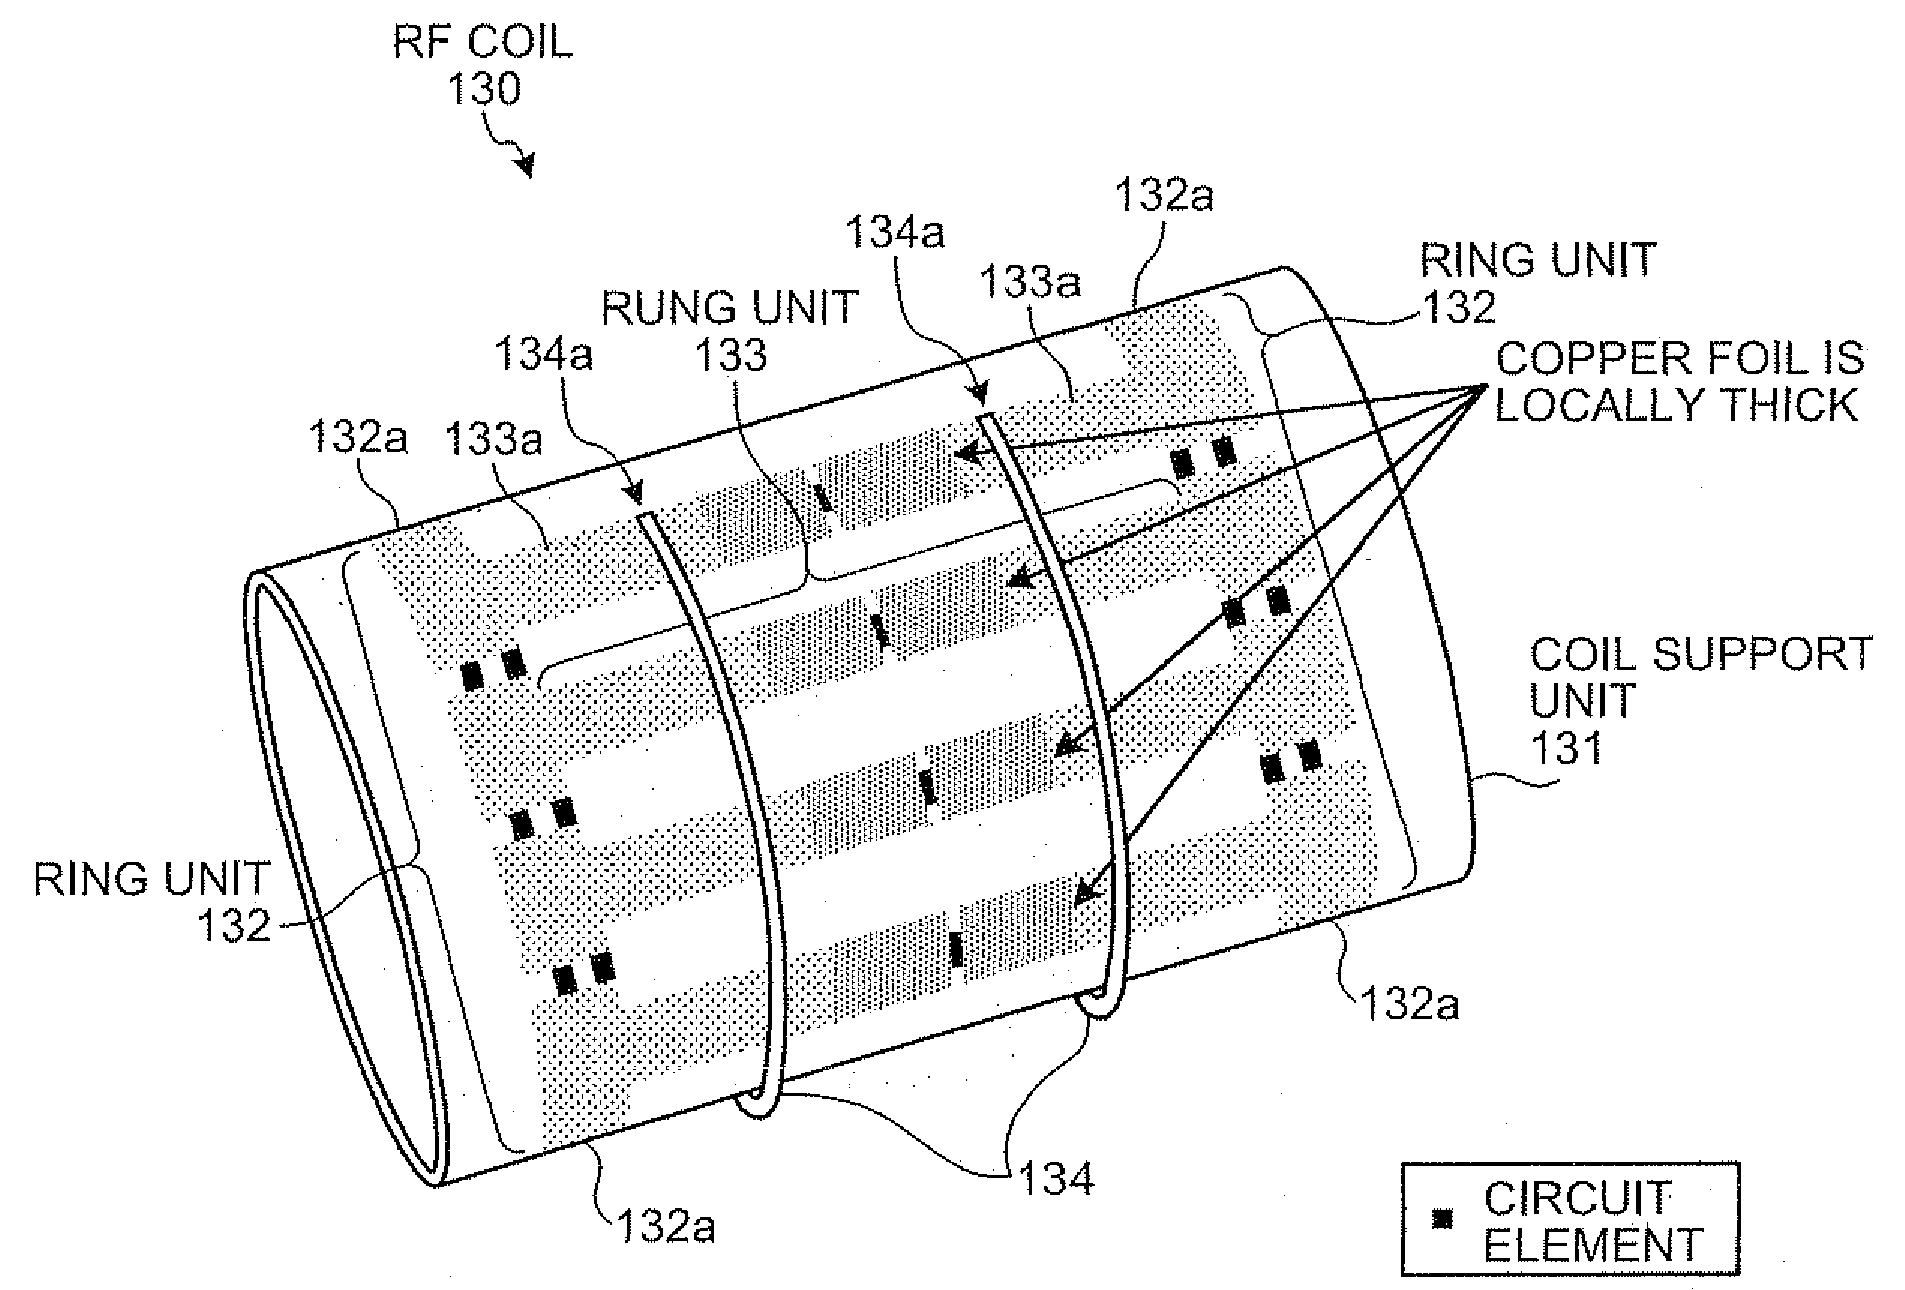 Magnetic resonance imaging system and RF coil